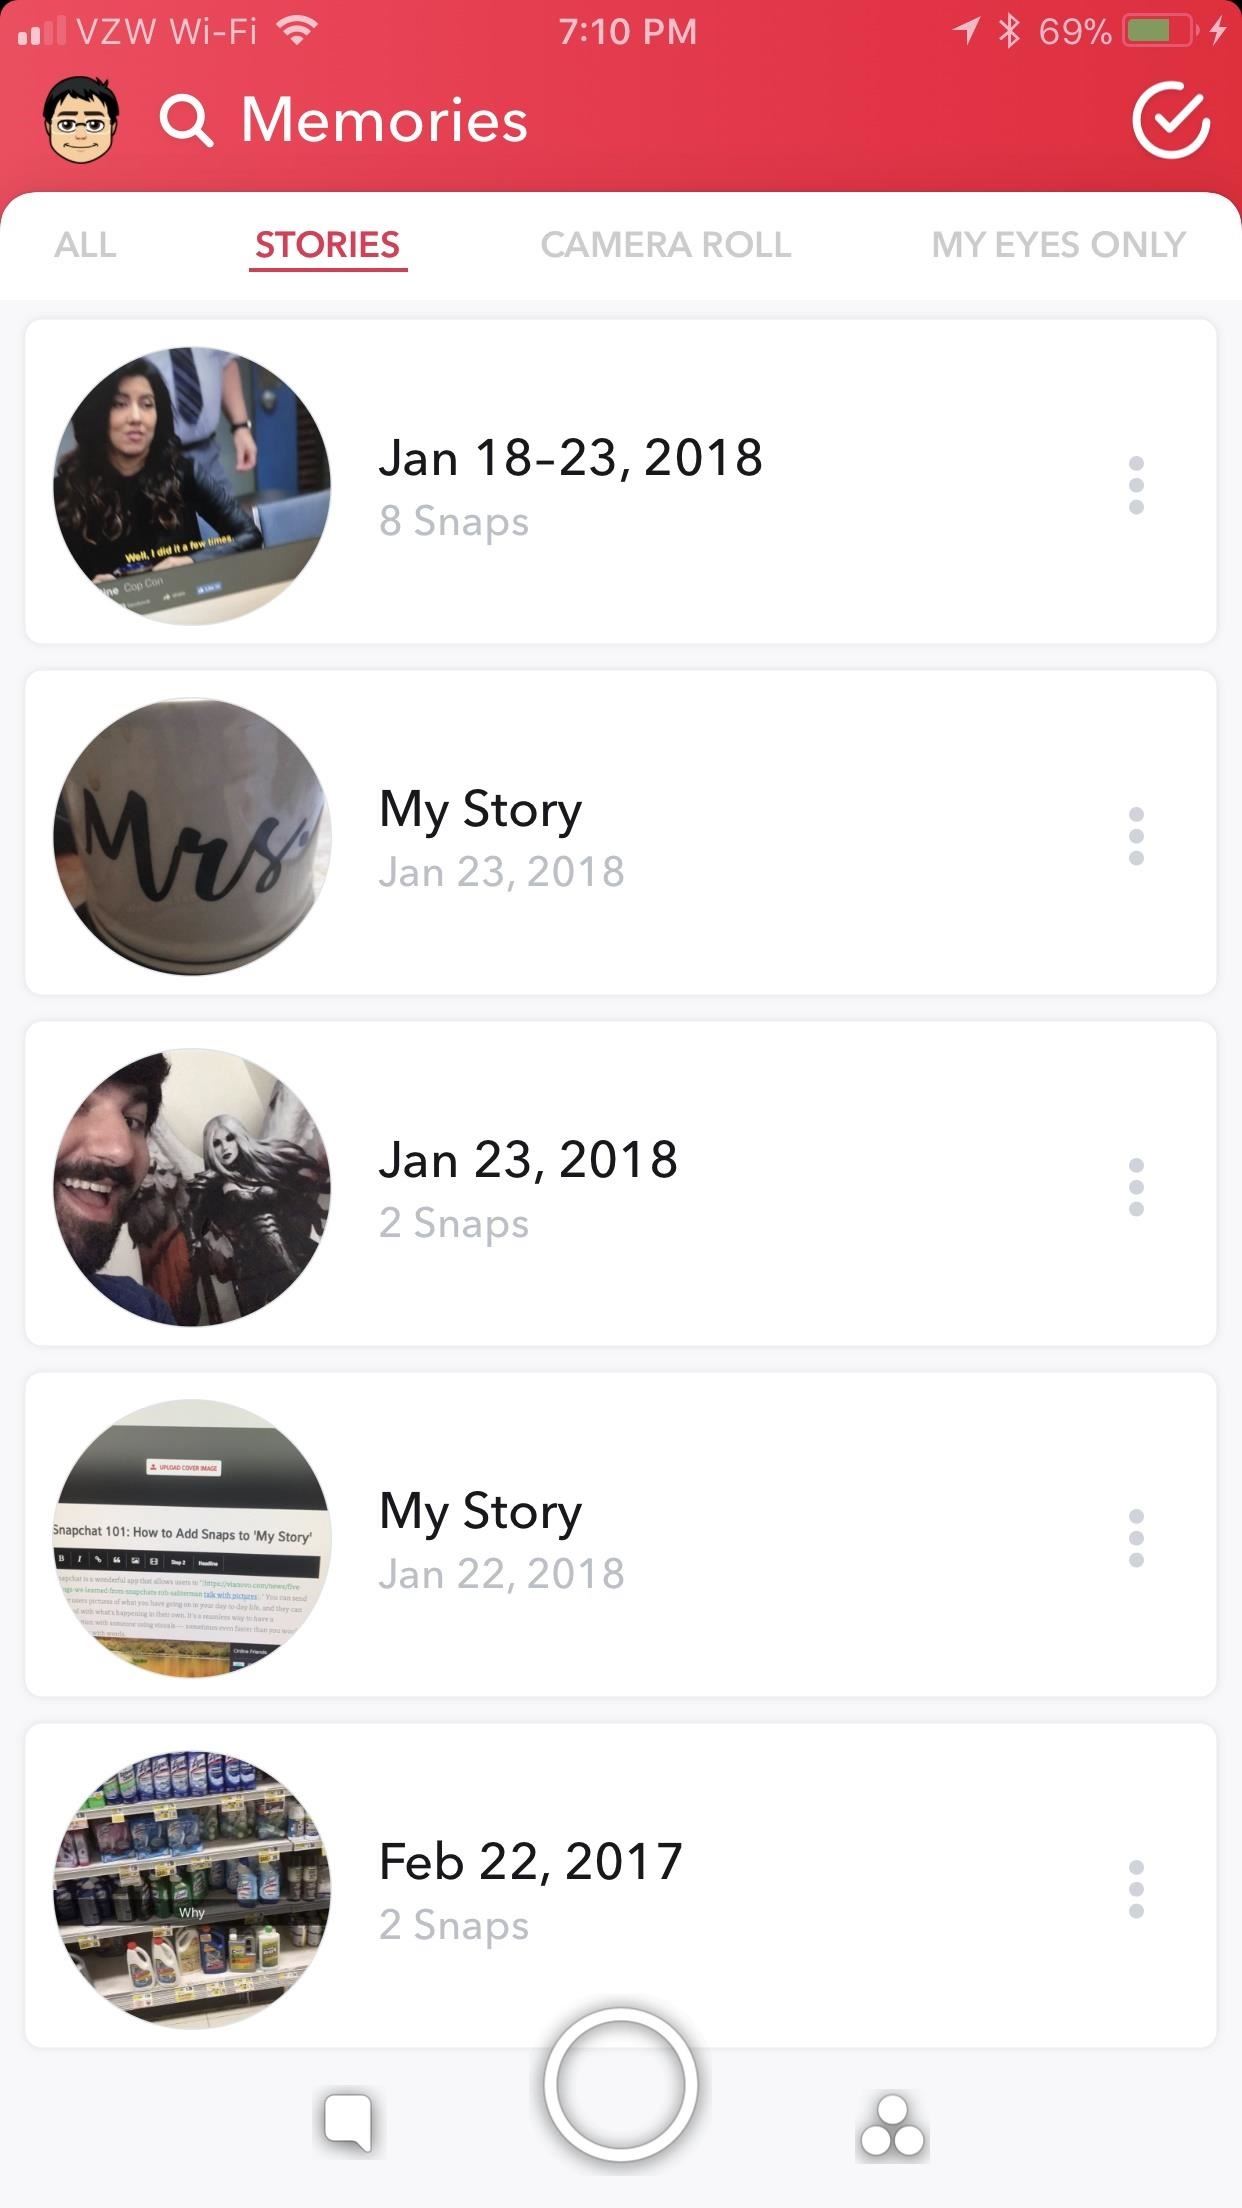 Snapchat 101: How to Use Memories to Save Snaps, Edit Old Snaps & More